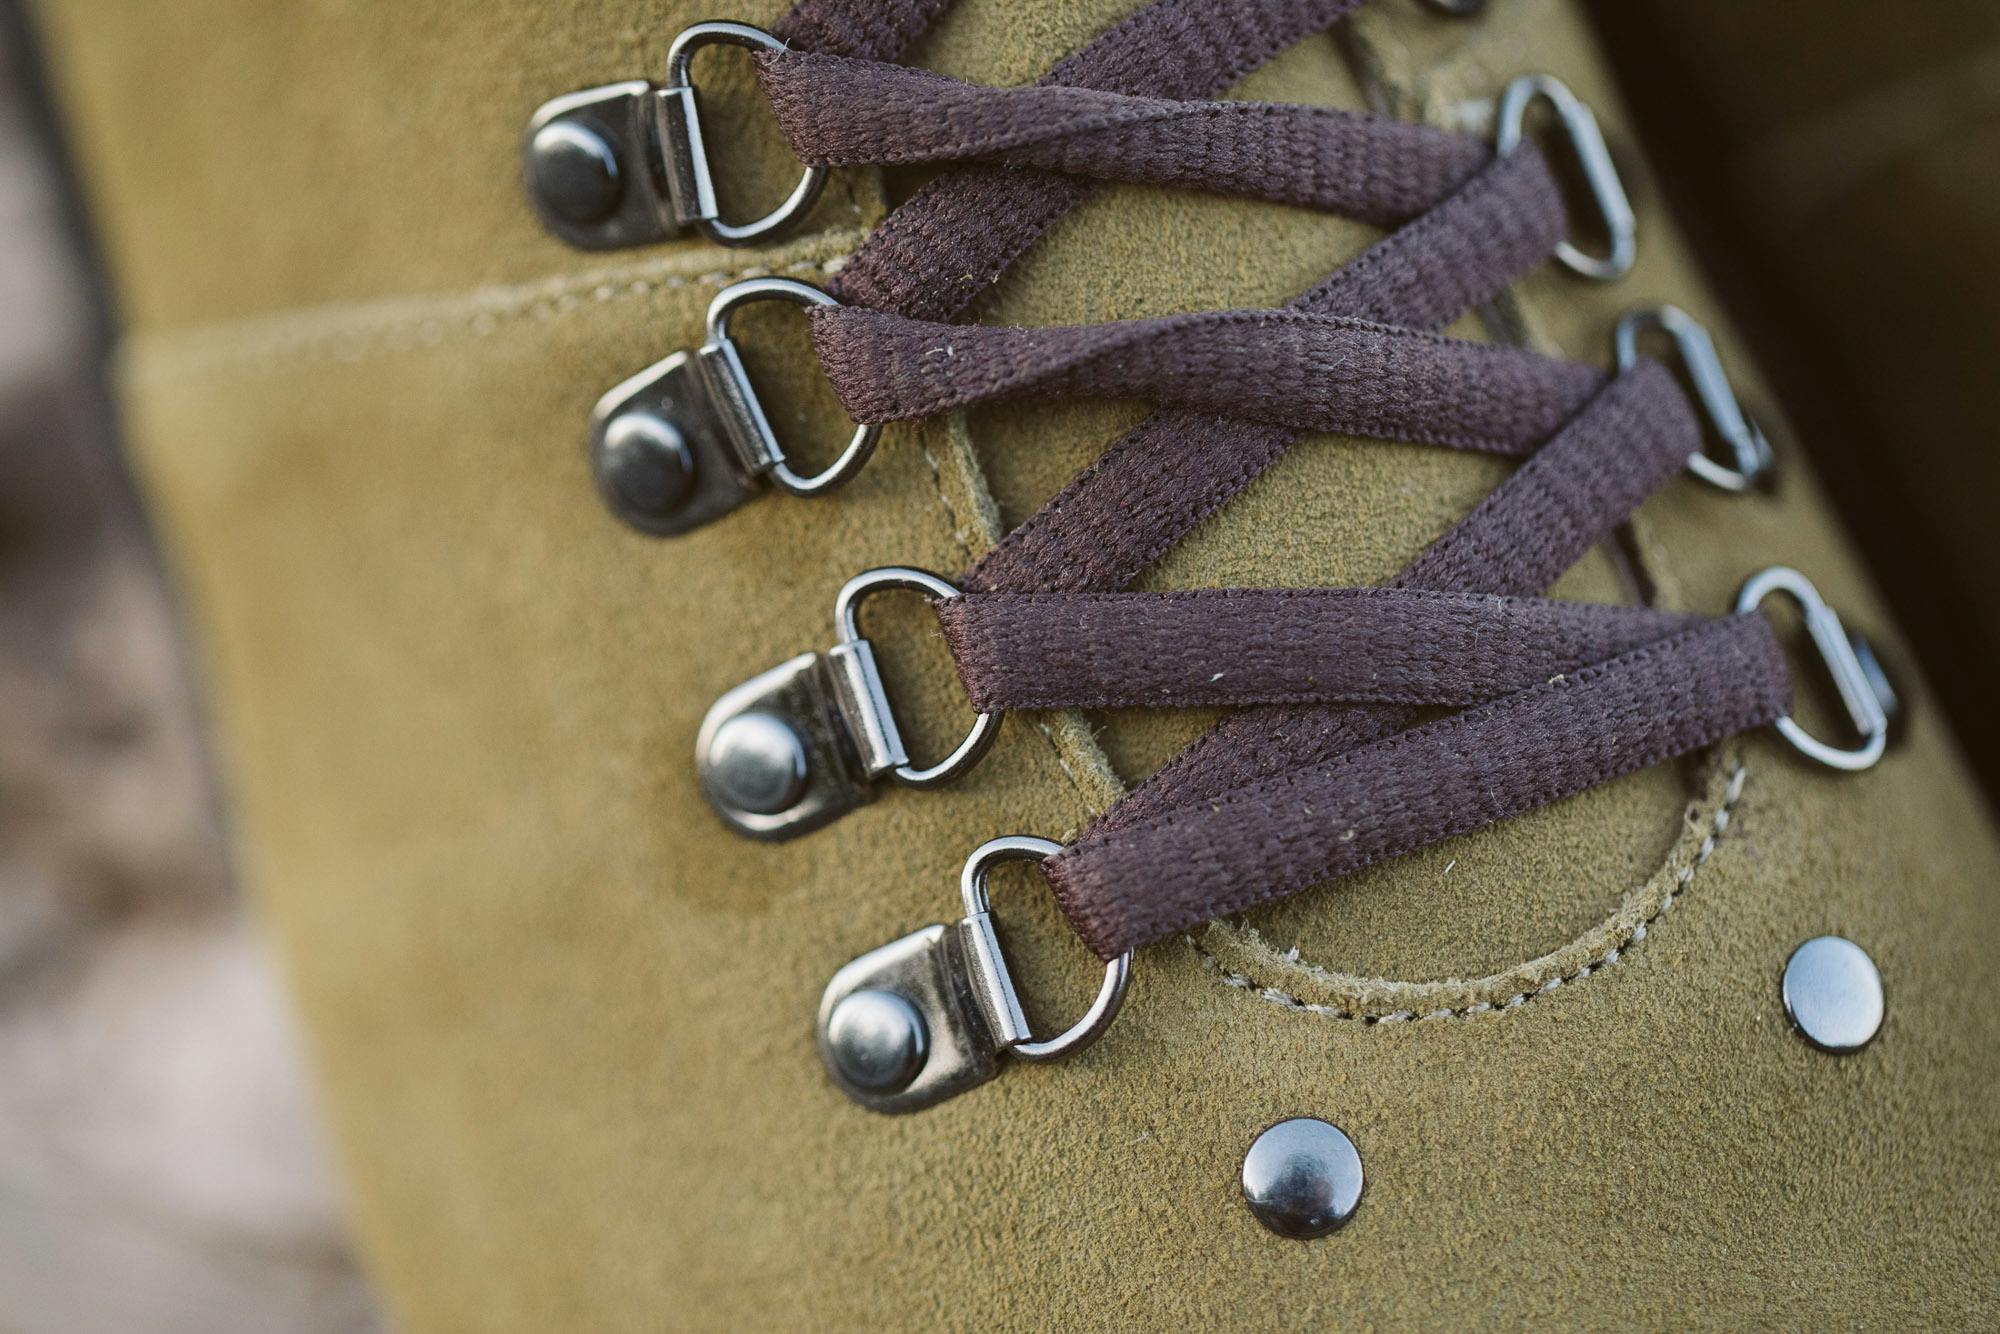 Close up detail on the laces and eyelets.